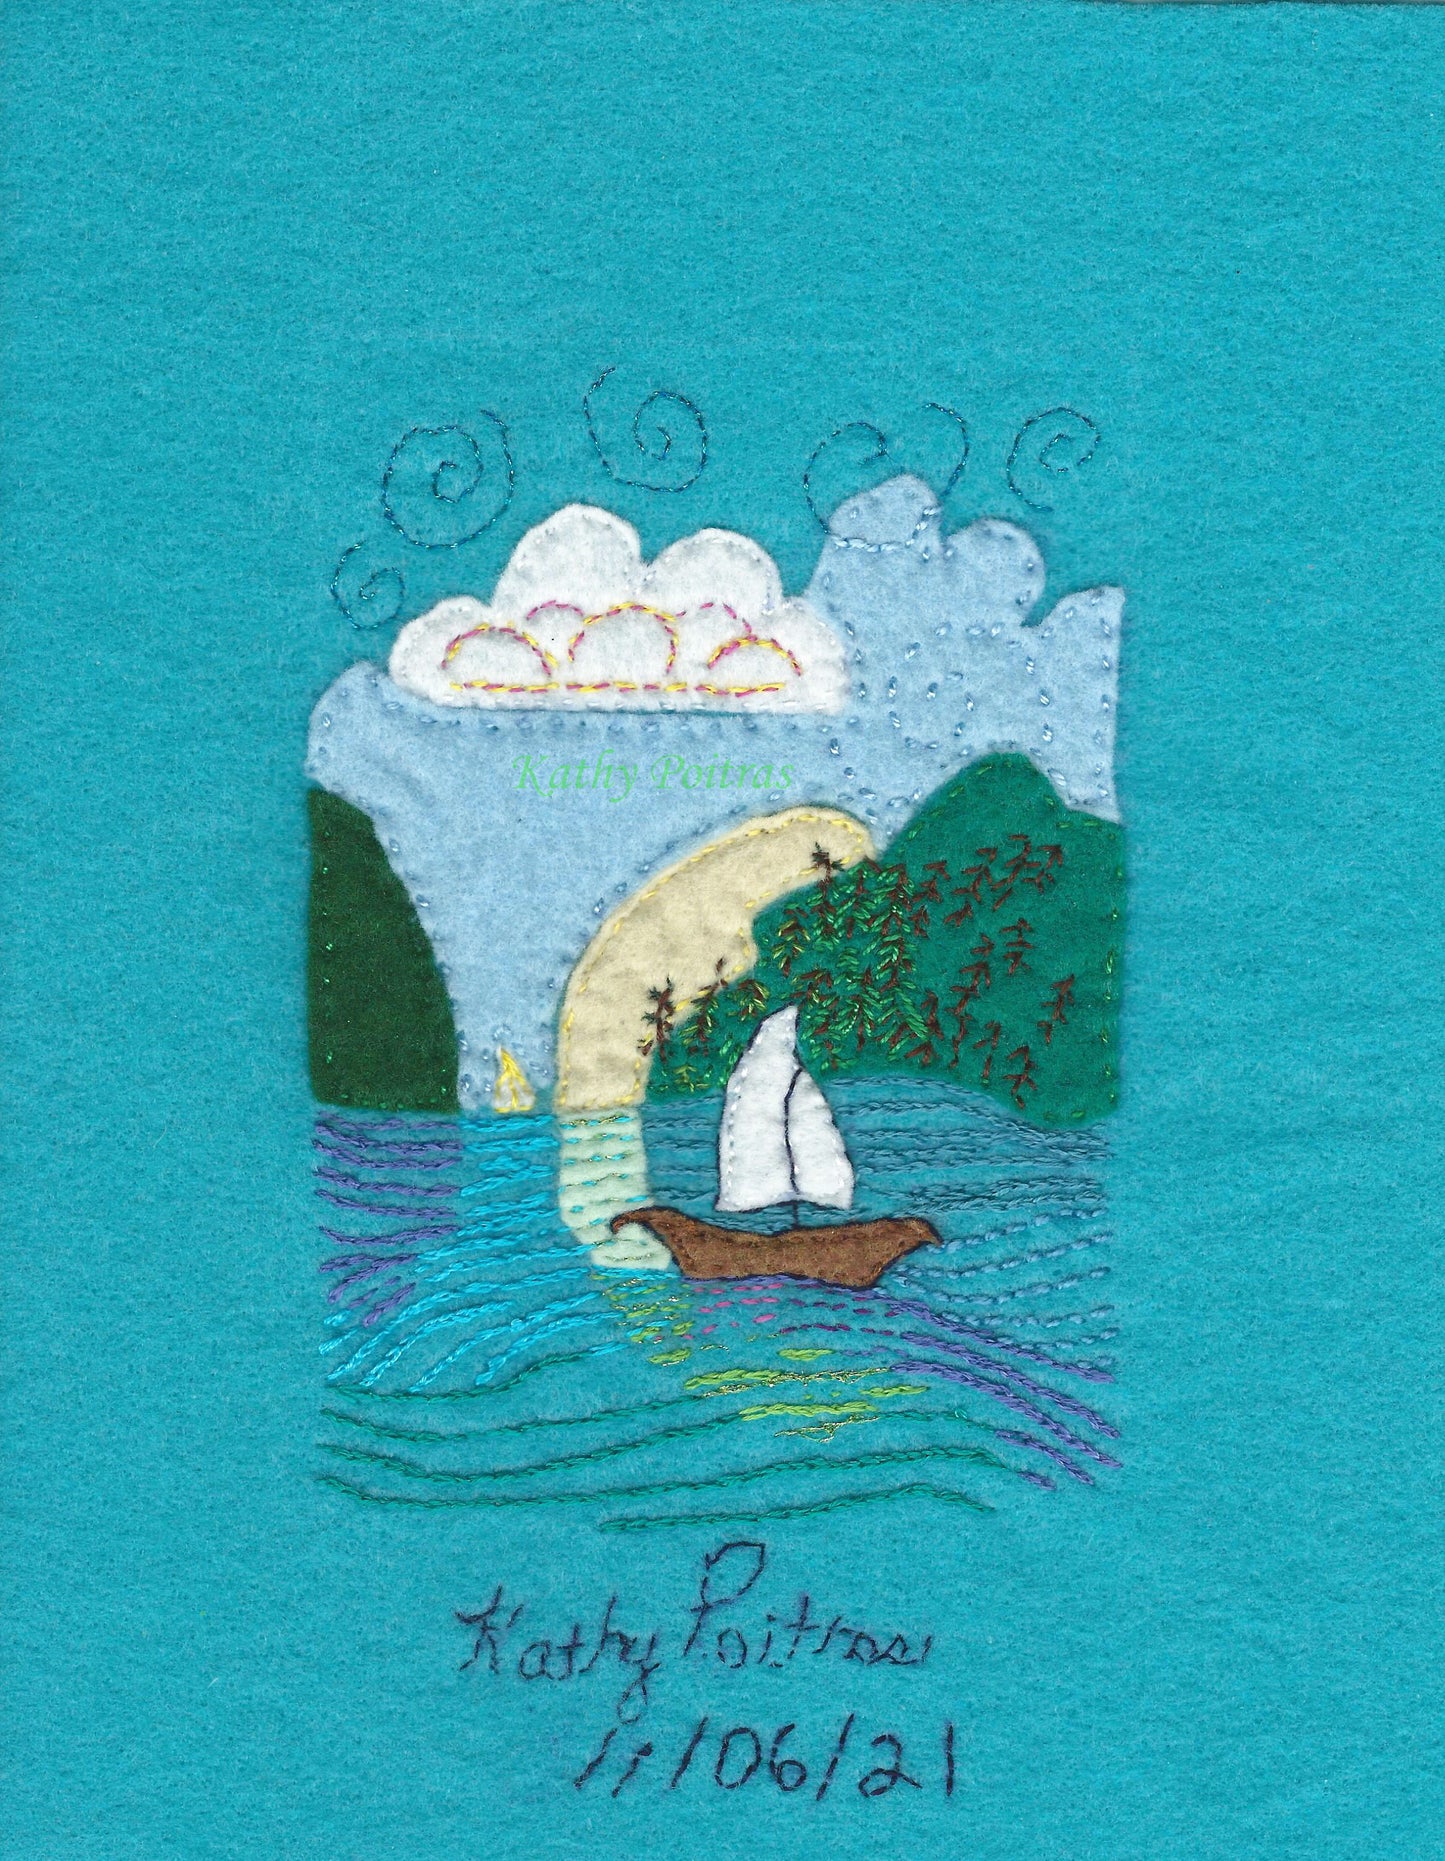 Over the Horizon. An original felt and hand embroidery with applique